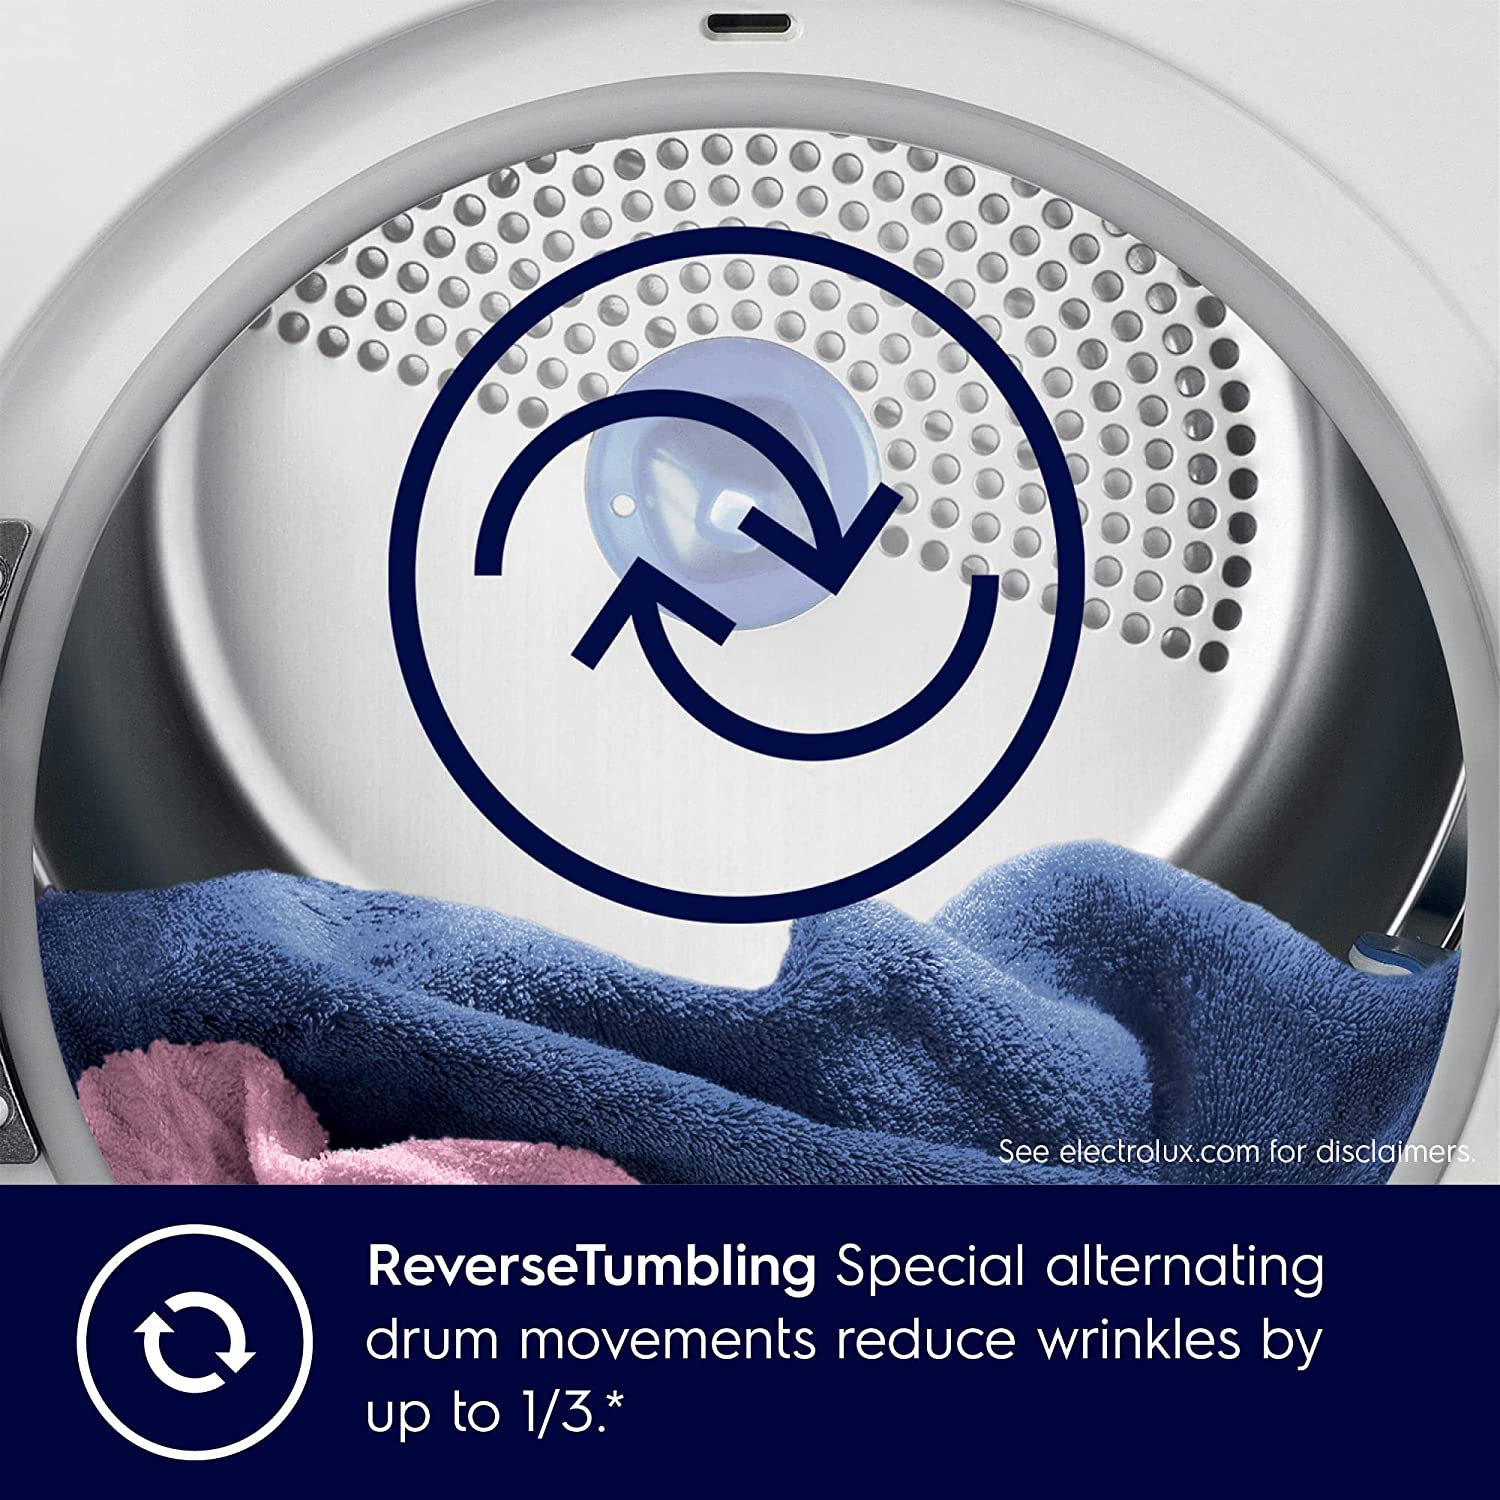 Electrolux 8.5kg Fully Automatic Front Load Venting Dryer,White, UltimateCare 300, EDV854J3WB